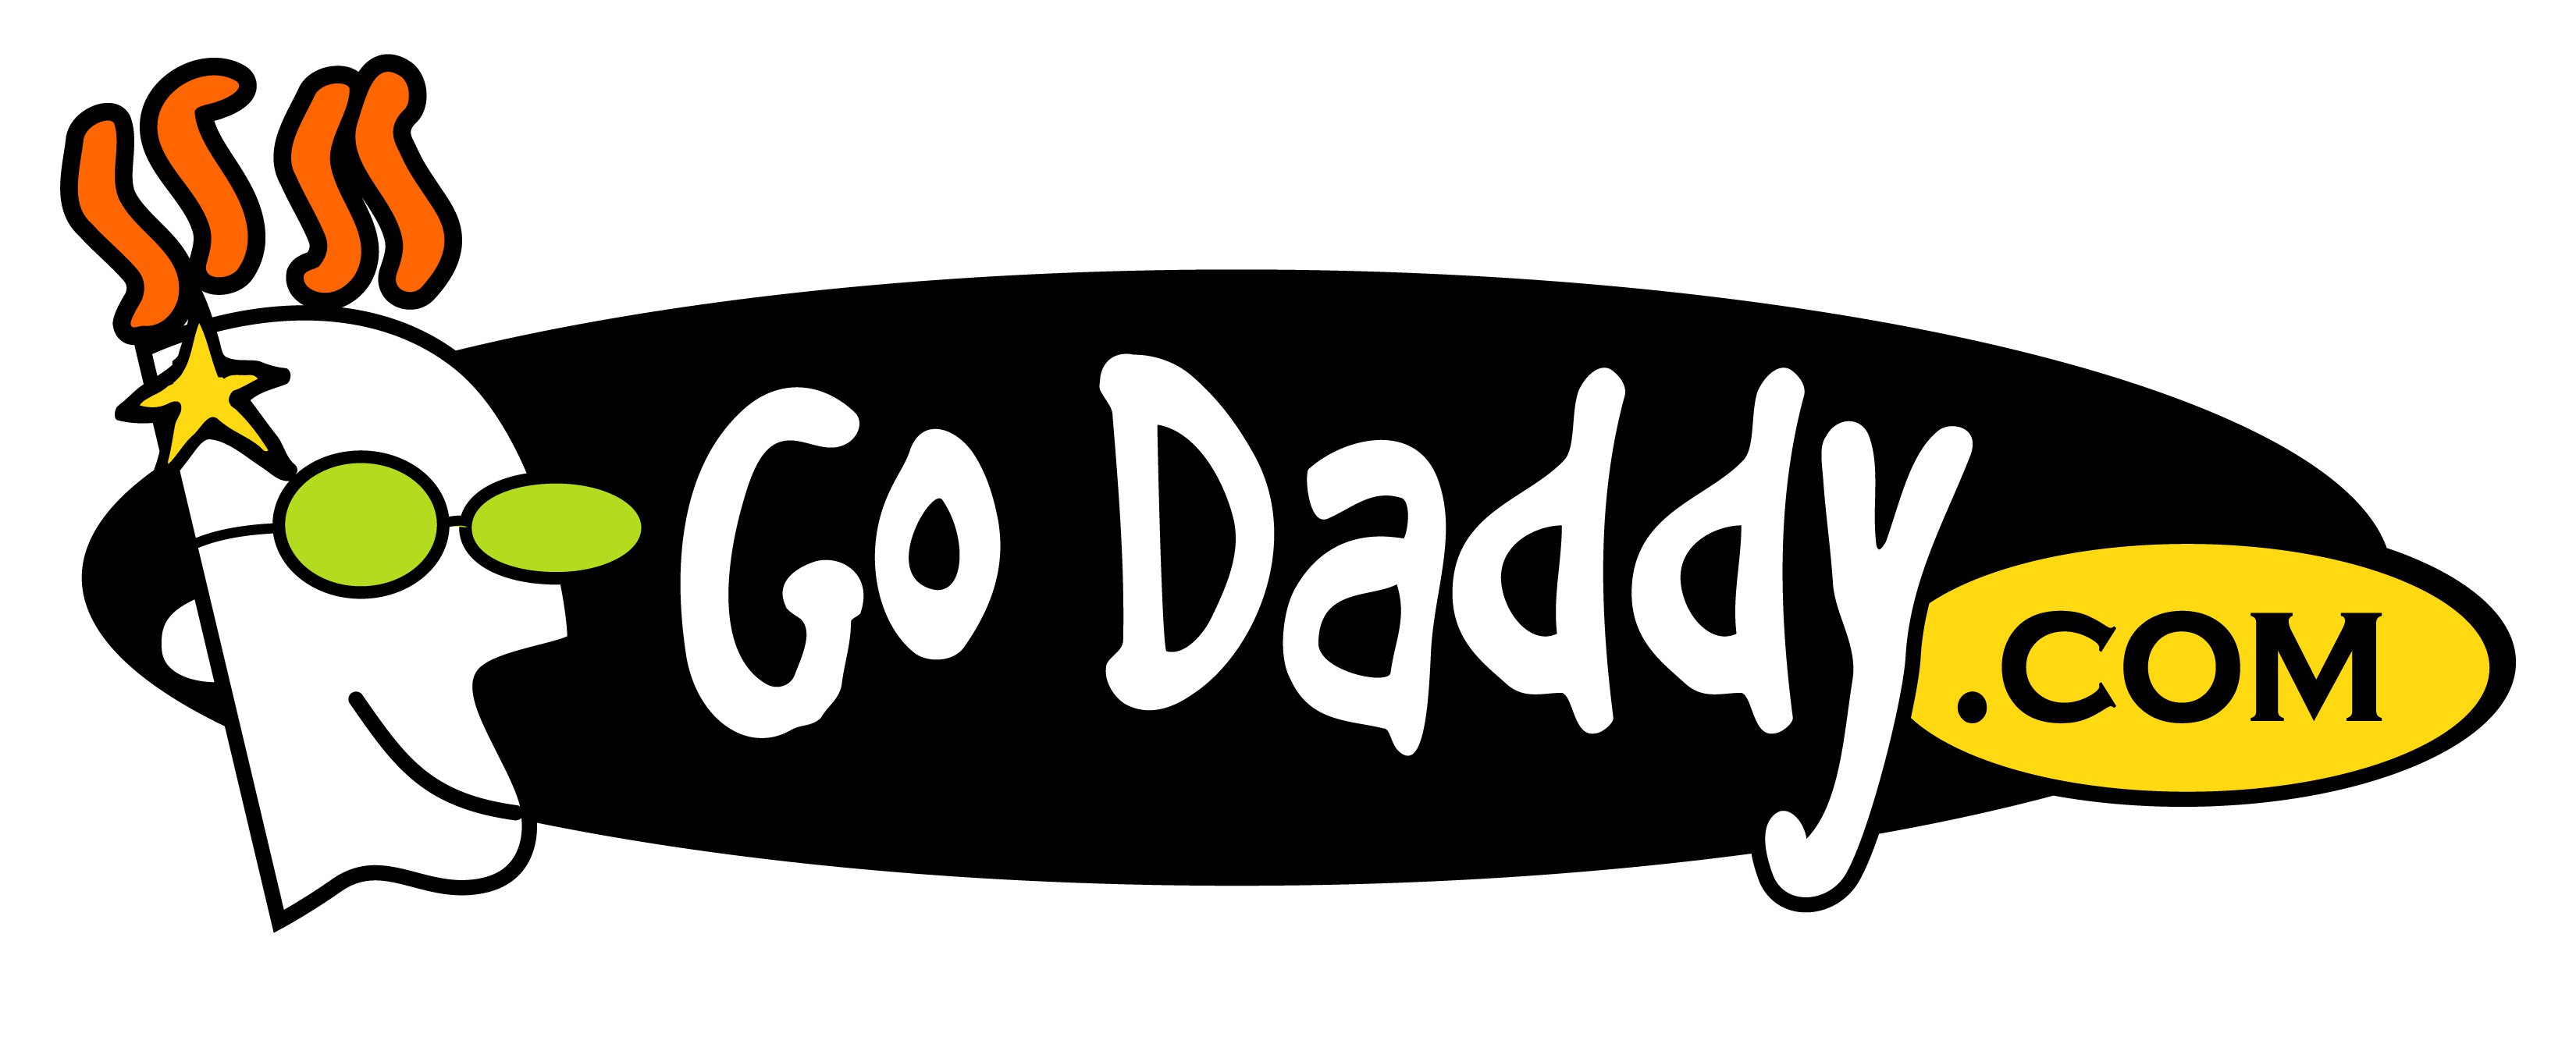 Godaddy Png Hdpng.com 3300 - Godaddy, Transparent background PNG HD thumbnail